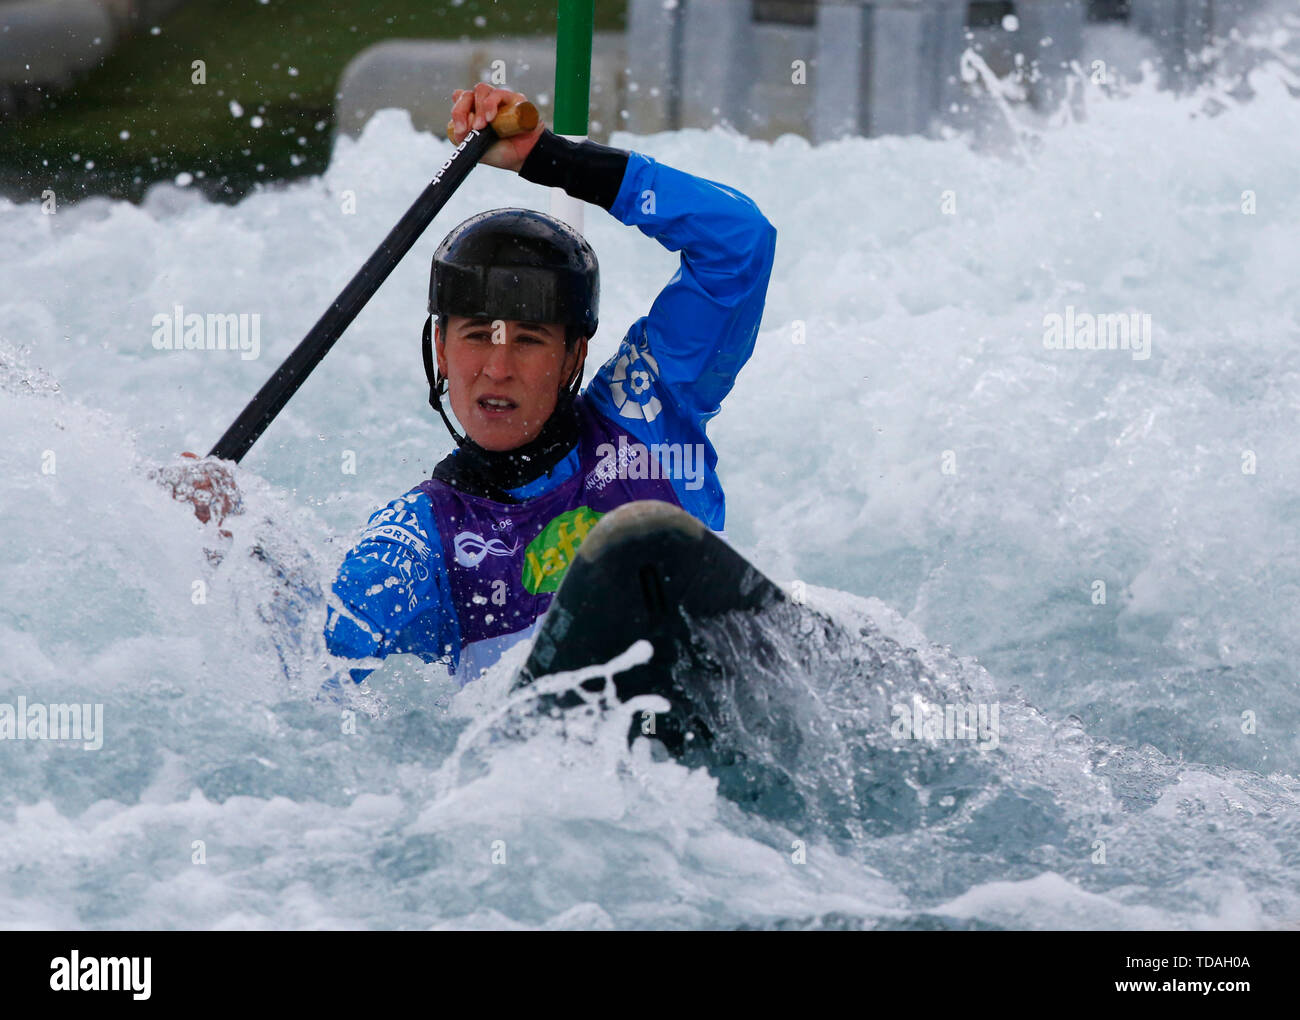 London, UK. 01st Feb, 2018. LONDON, ENGLAND JUNE 14 Nuria Vilarrubla (ESP) Compete in Women's C1 1st Heat Run during 2019 ICF Canoe Slalom World Cup 1 at the Lee Valley White Water Centre, London on 14 June 2019 Credit: Action Foto Sport/Alamy Live News Stock Photo